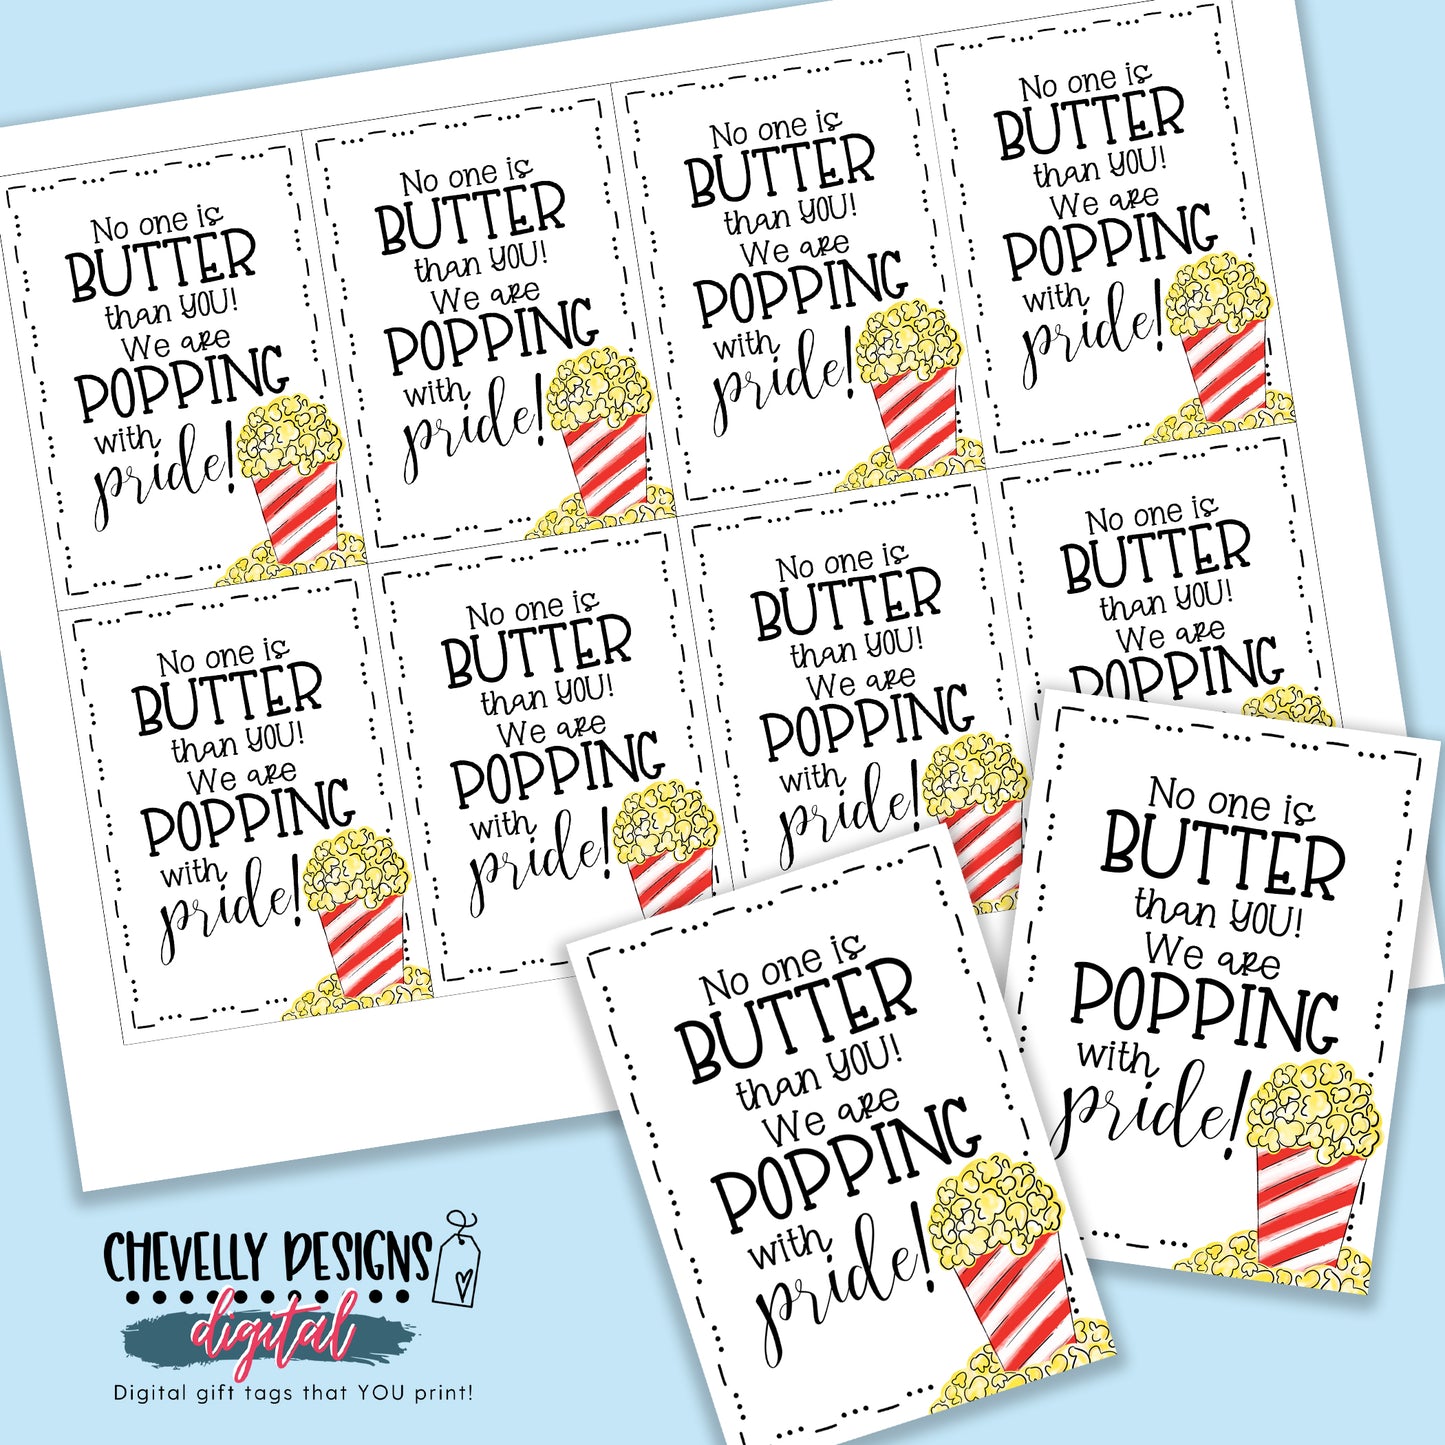 Printable "No One is Butter than You!" Popcorn Gift Tags - Instant Digital Download